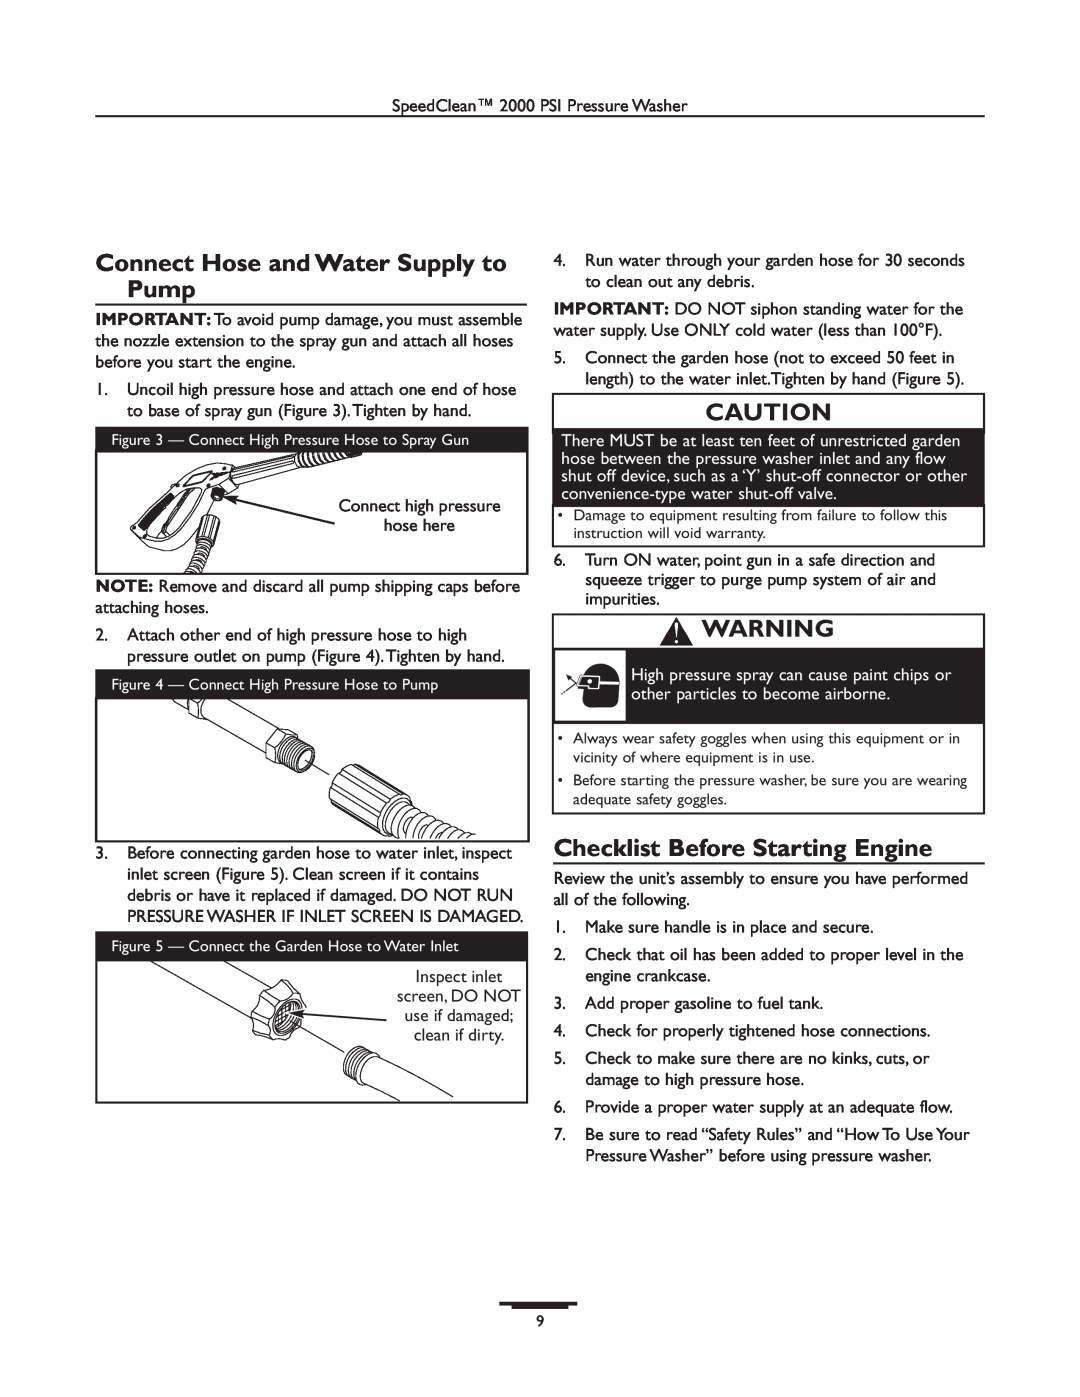 Briggs & Stratton 020238-0 operating instructions Connect Hose and Water Supply to Pump, Checklist Before Starting Engine 